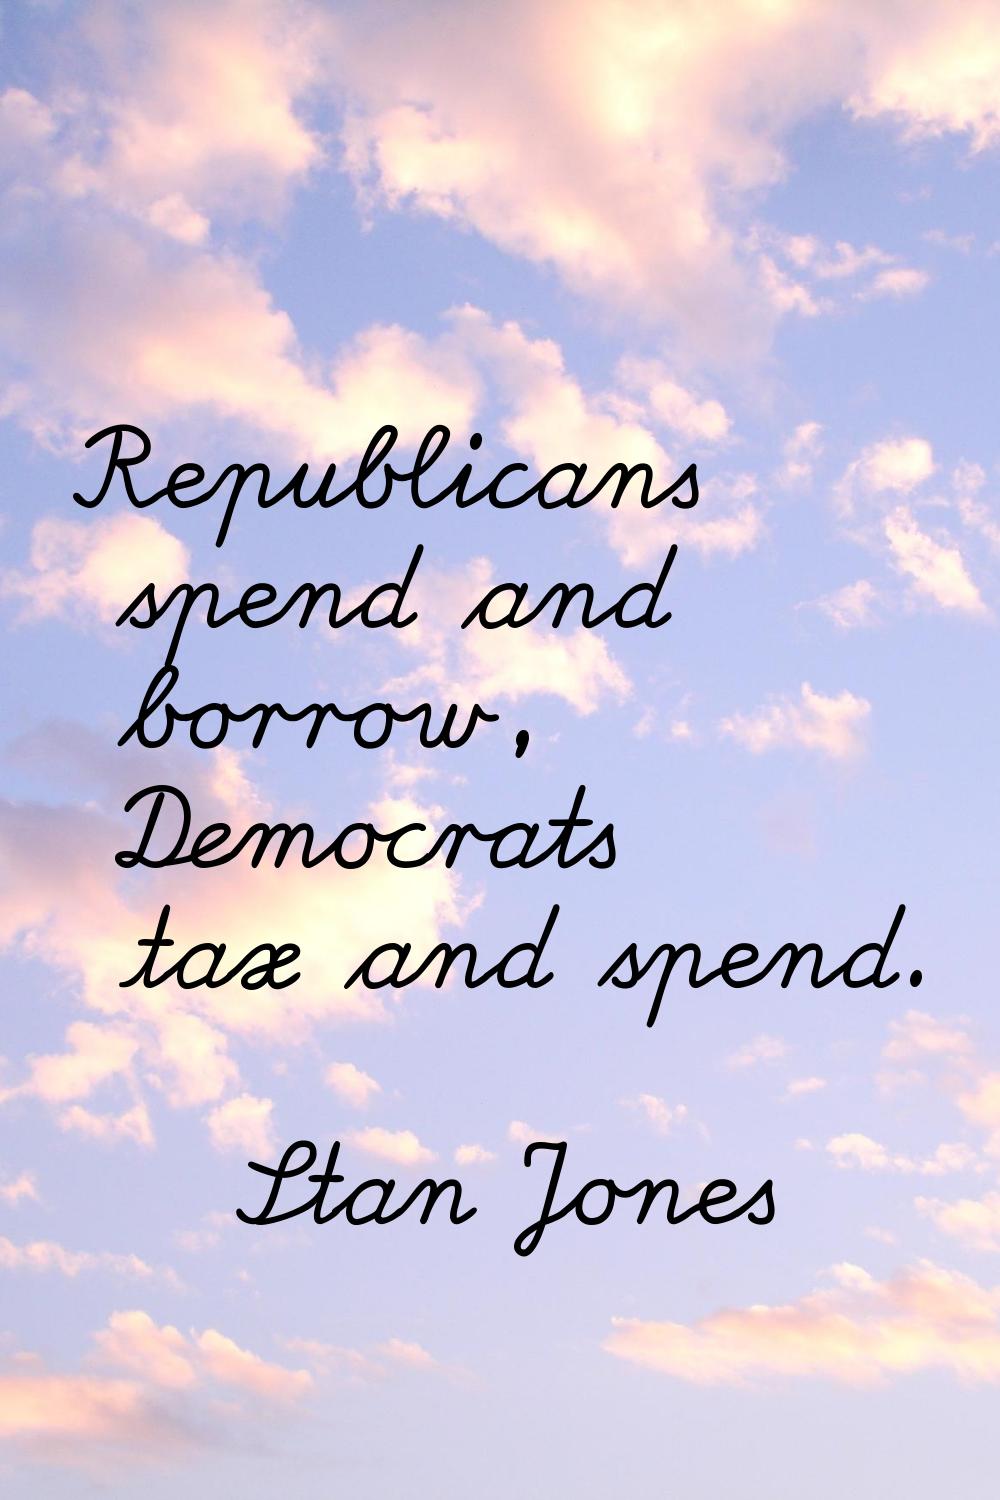 Republicans spend and borrow, Democrats tax and spend.